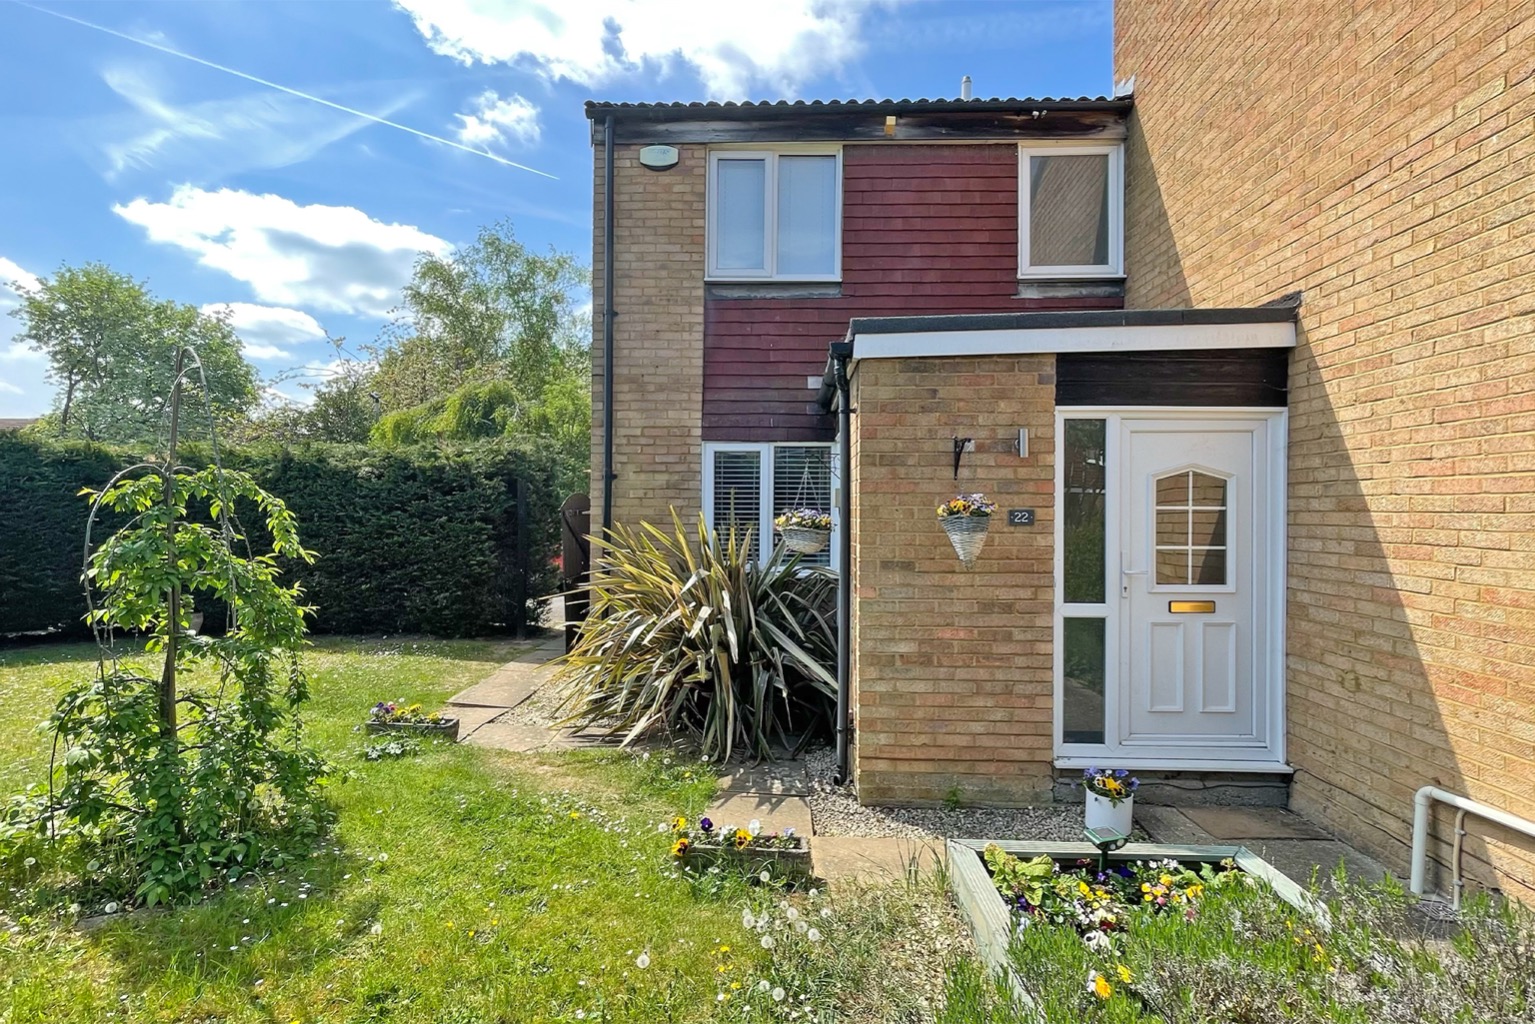 2 bed end of terrace house for sale in Purssell Close, Maidenhead, SL6 